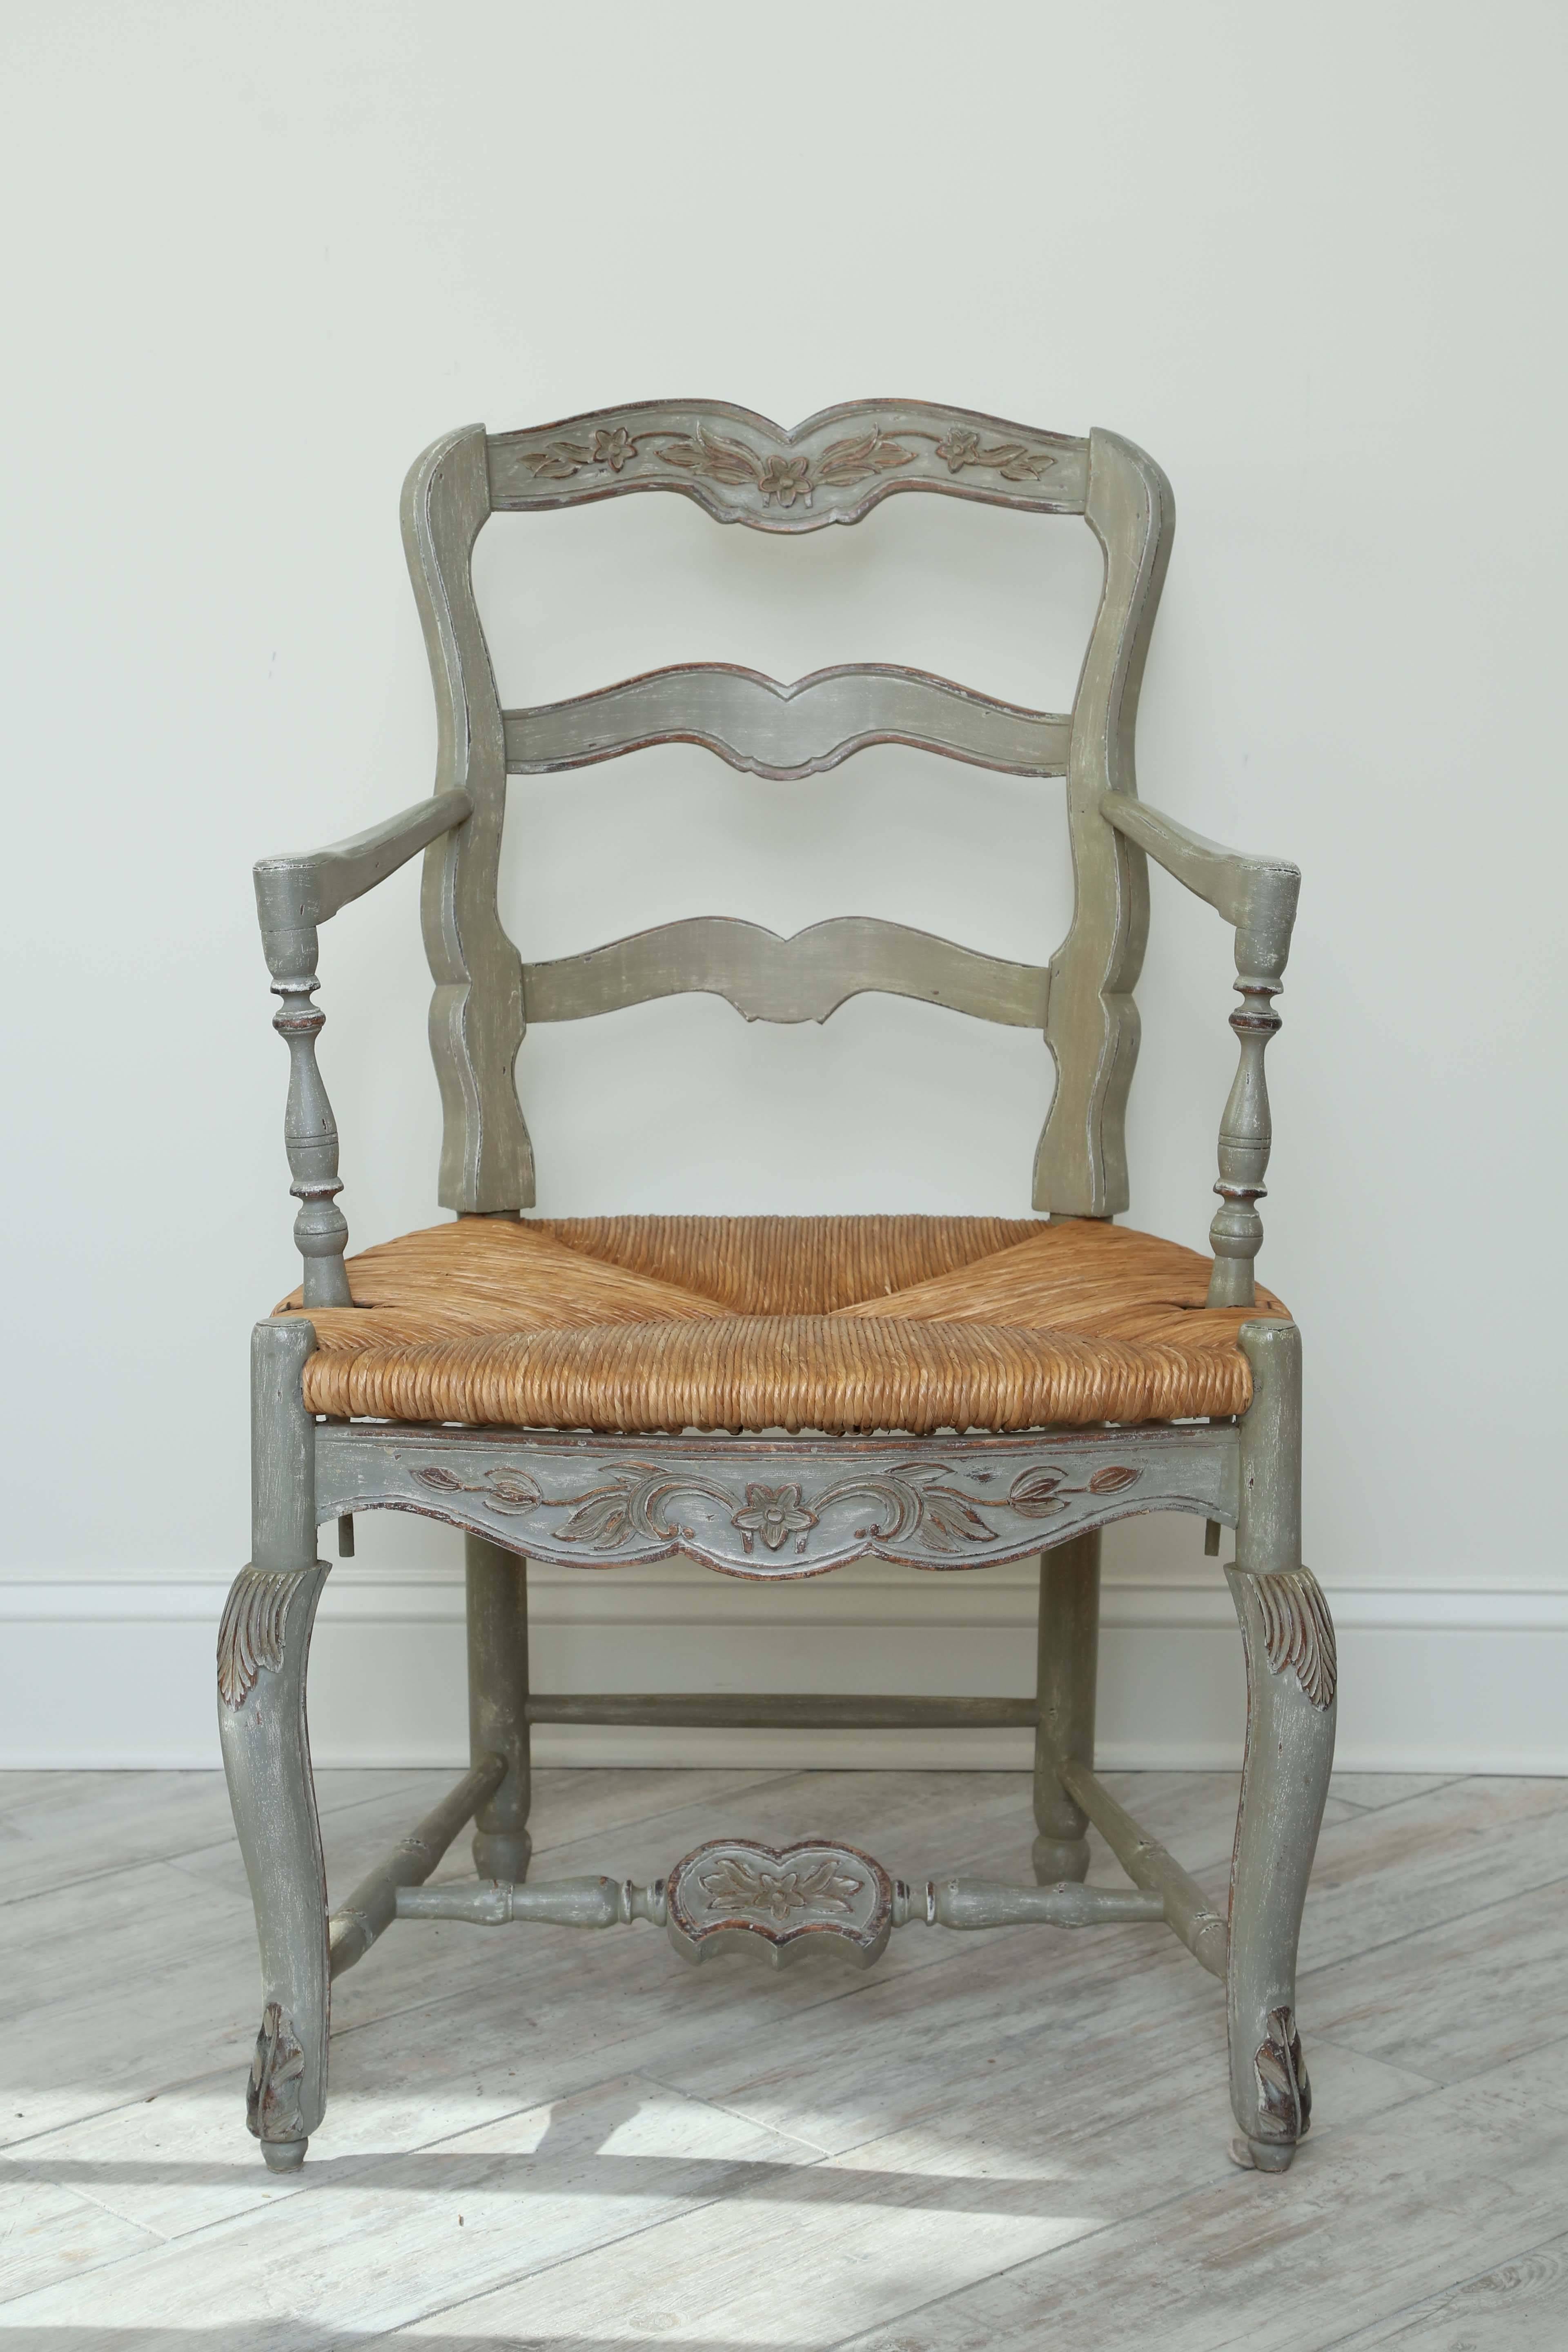 Lovely pair of painted country French armchairs with rush seats.